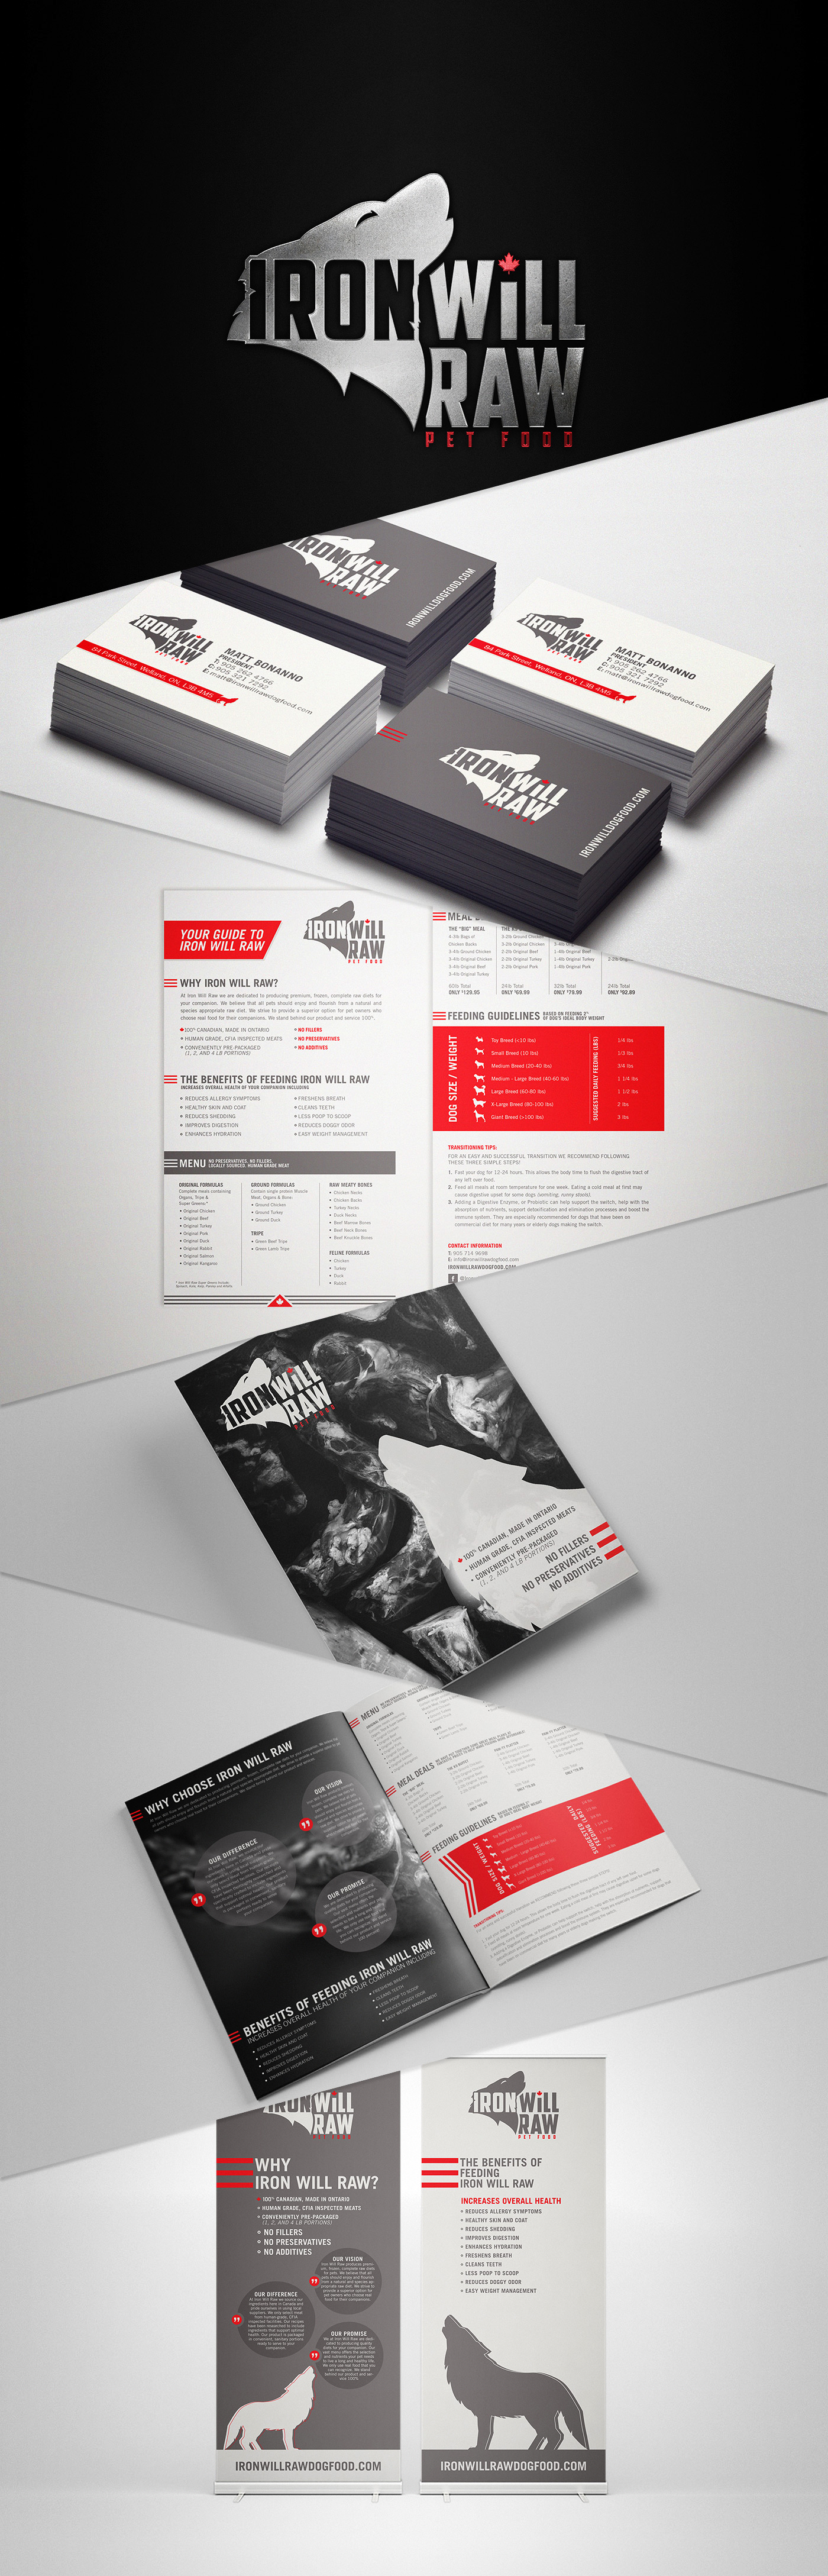 graphic design  art direction  print raw dog food iron will wolf pet food bsuiness card banner brochure